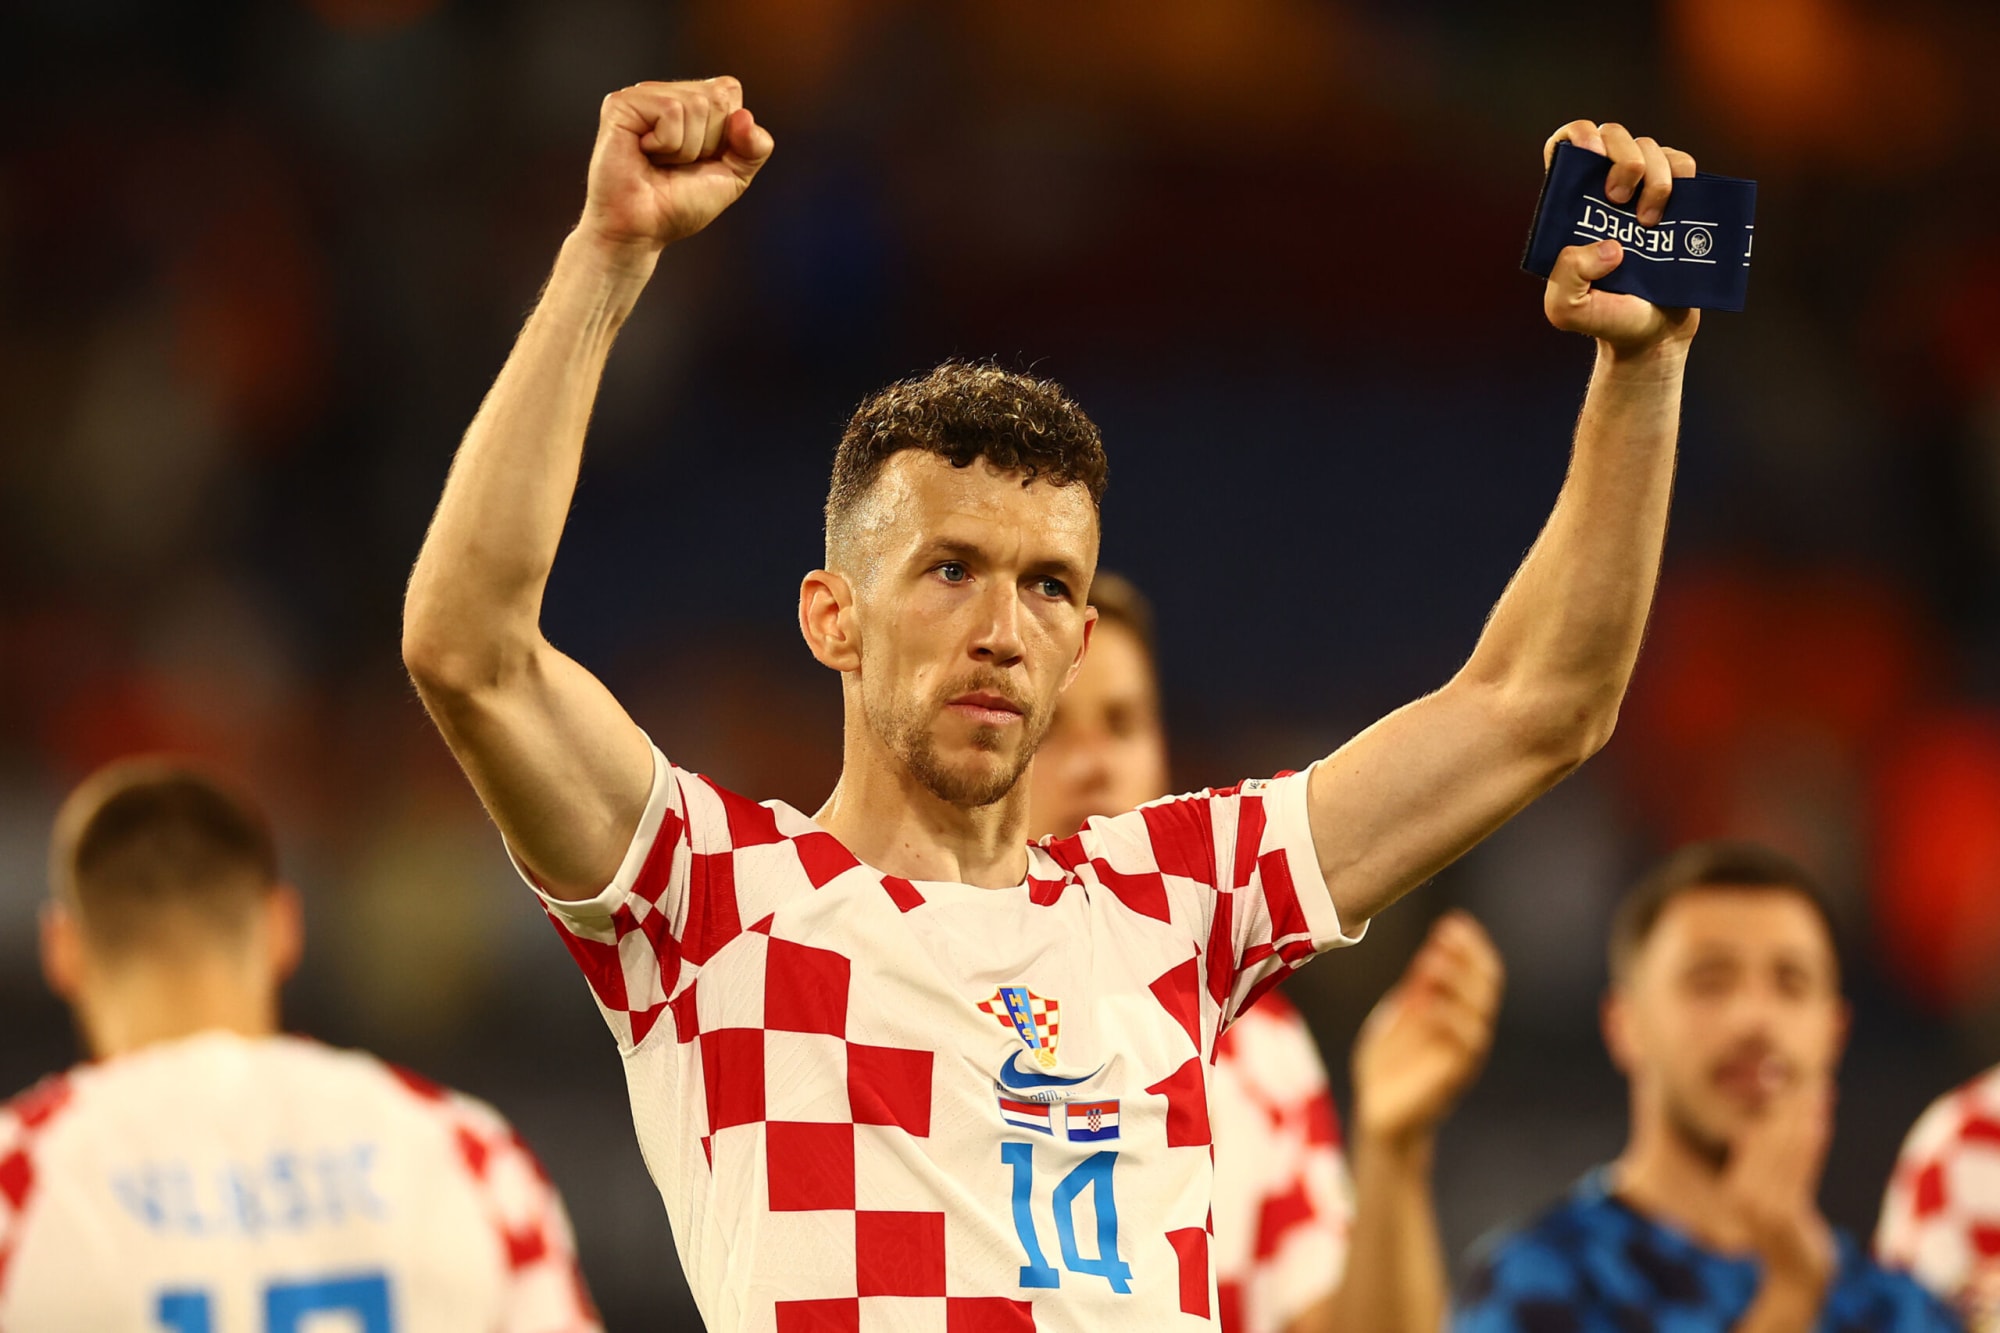 DiMarzio reports Perisic is leaving Tottenham, while Romano says nothing official